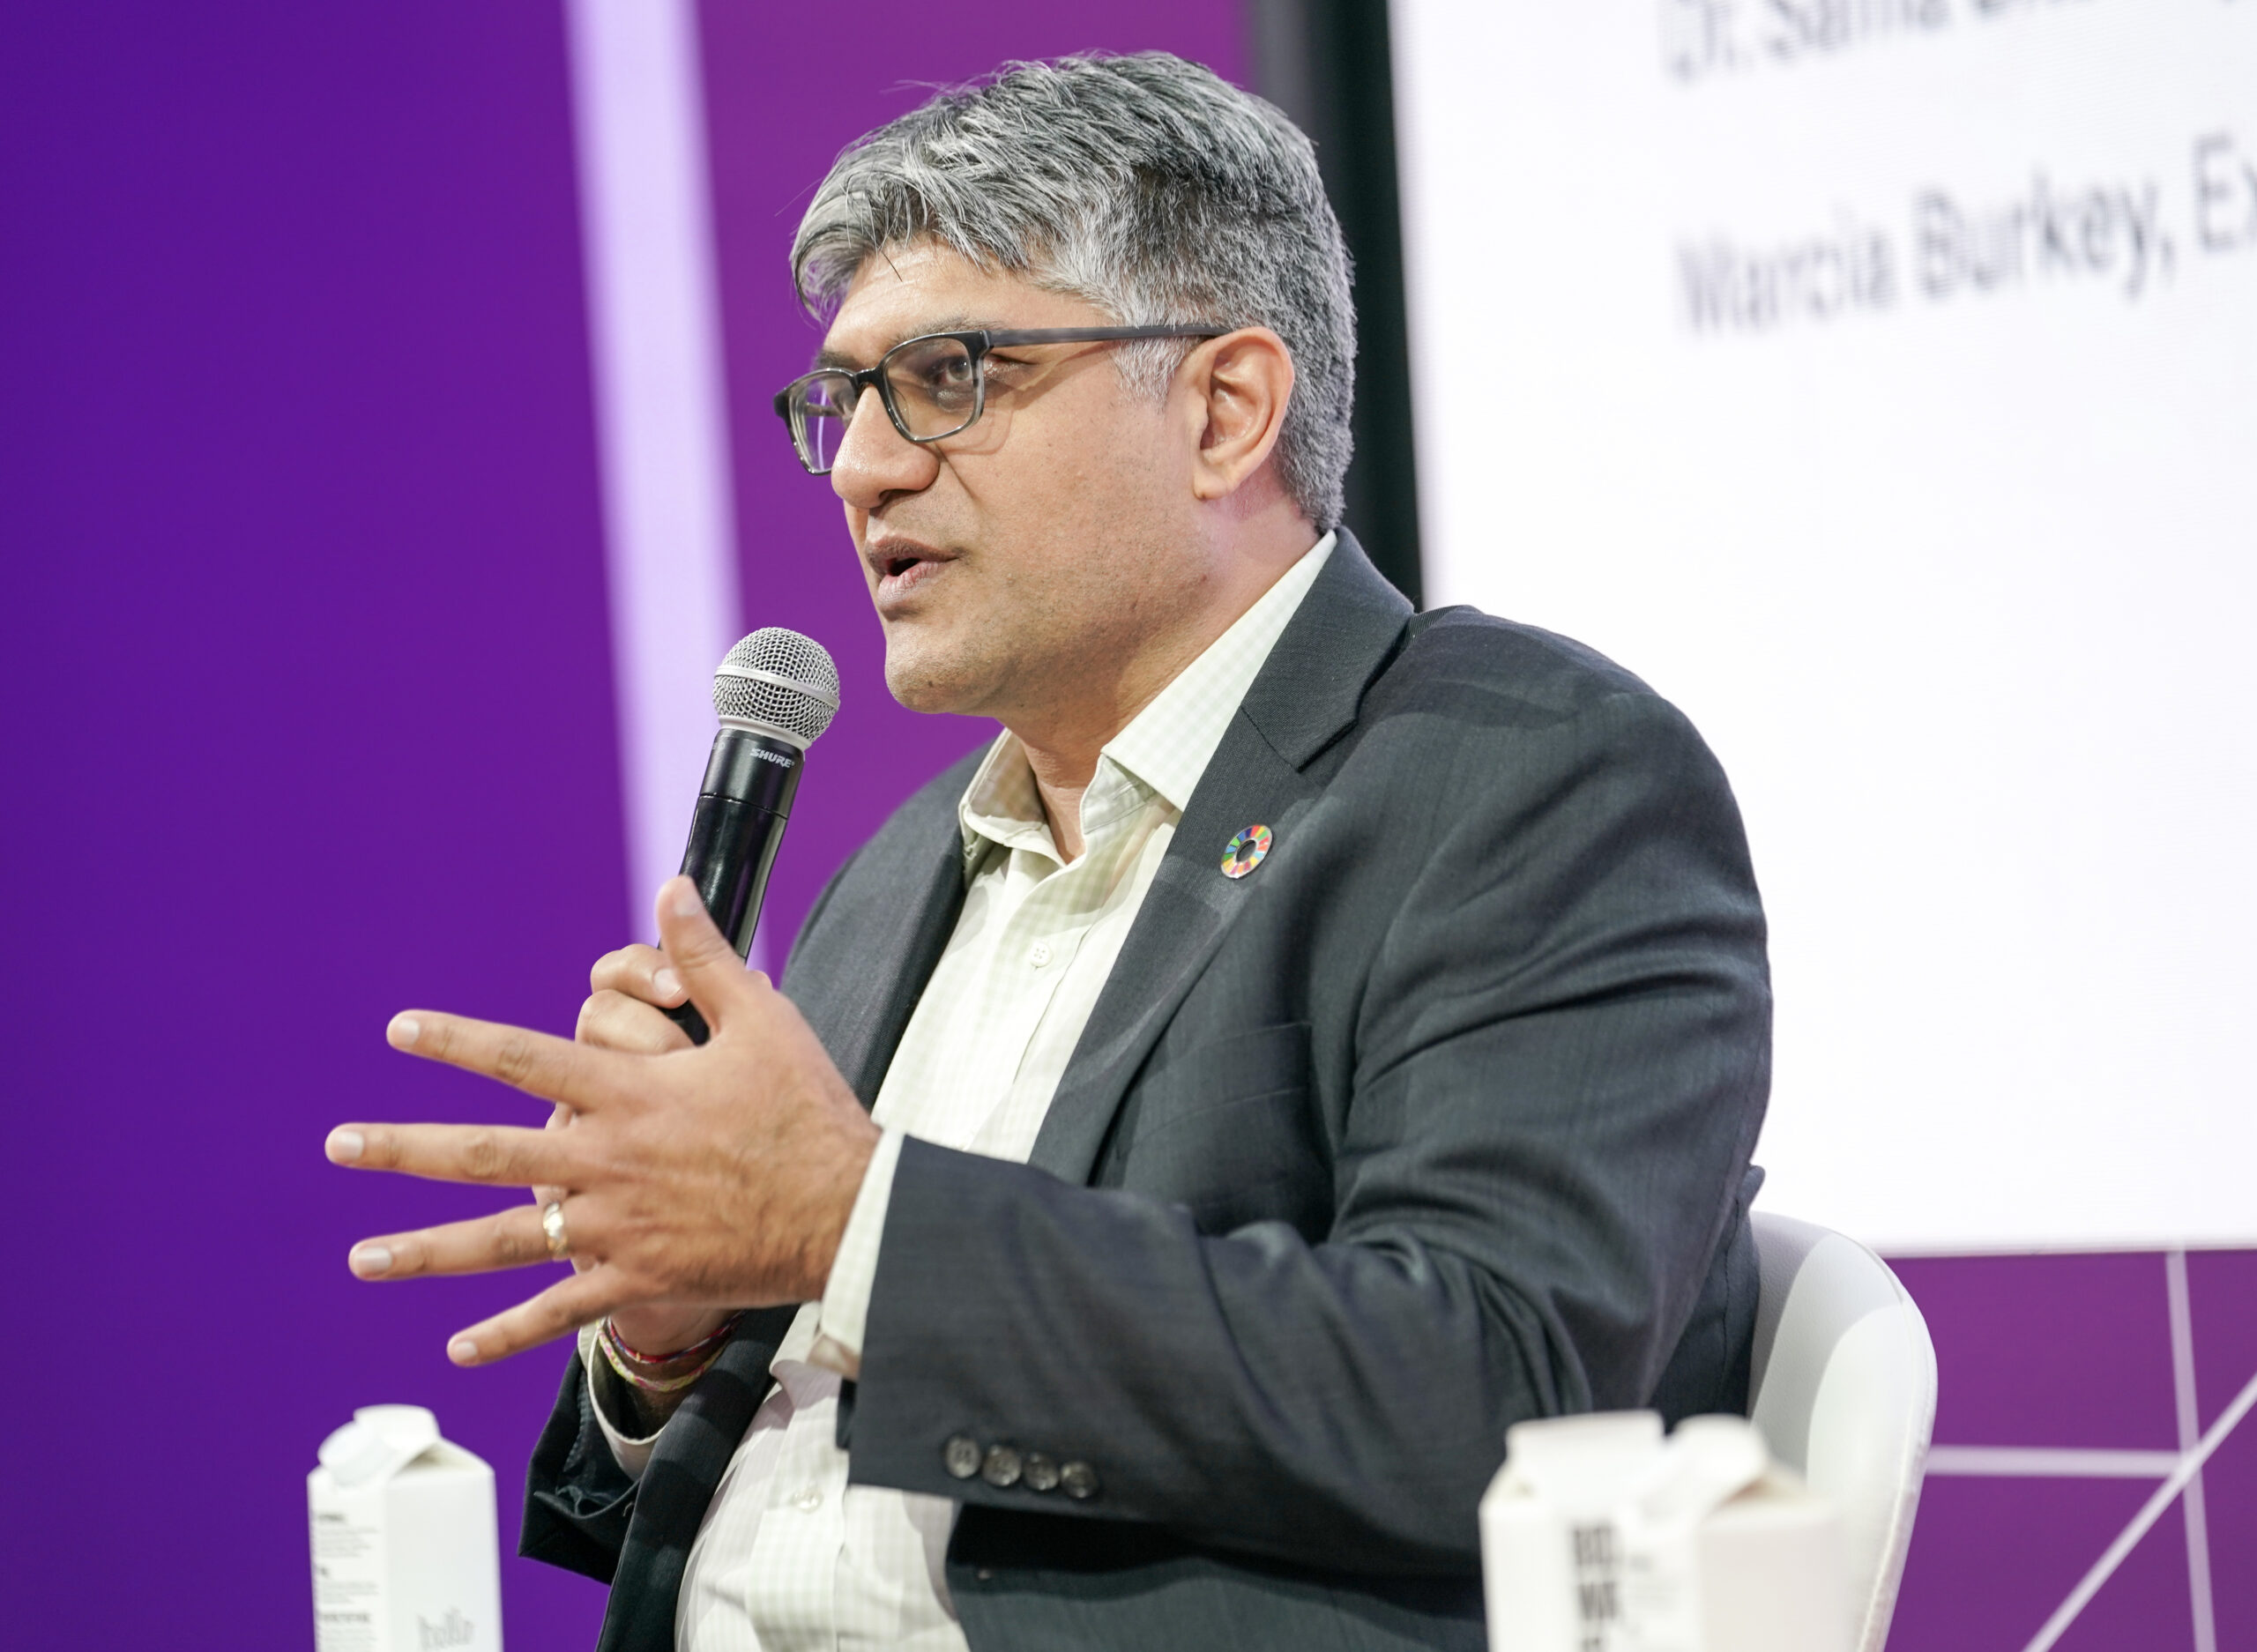 Jigar Shah, director of the U.S. Department of Energy's Loan Programs Office, seen against a purple background.